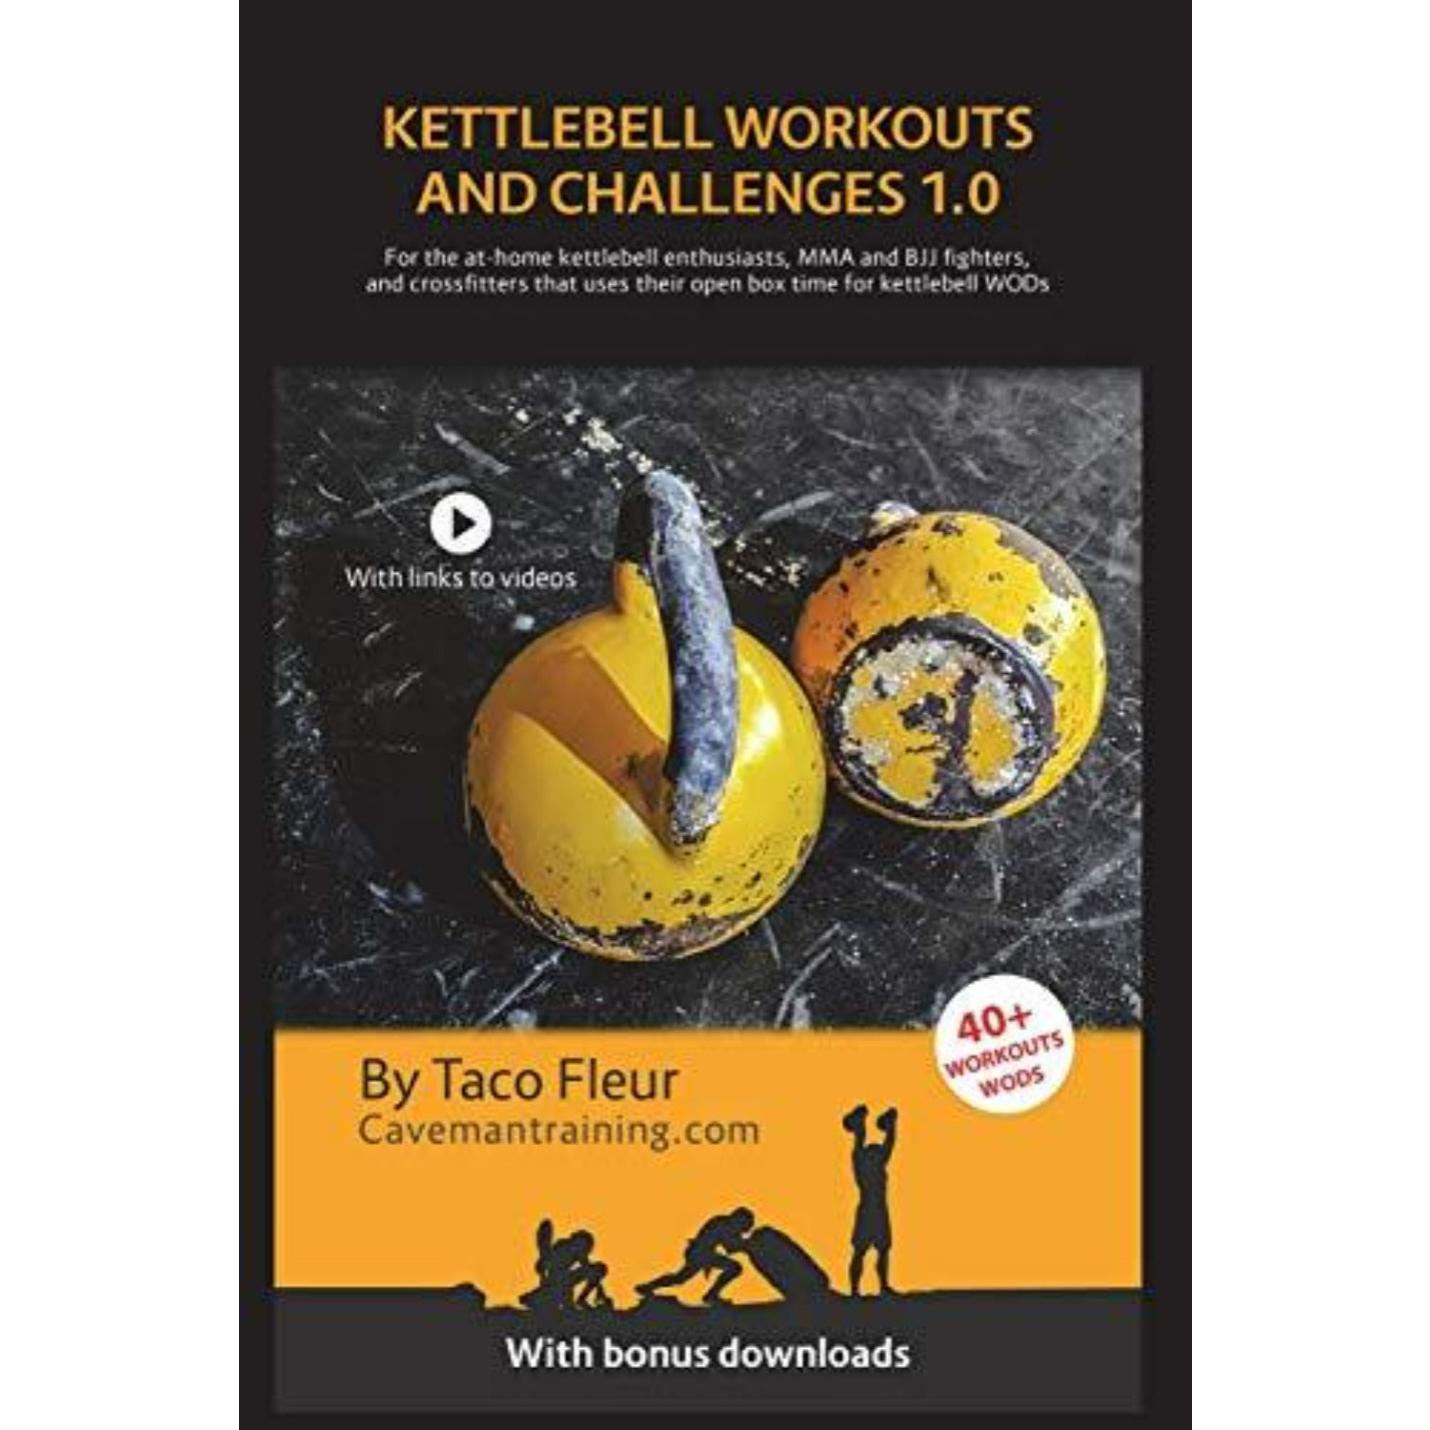 Kettlebell Workouts and Challenges 1.0: For the at-home kettlebell enthusiasts, MMA and BJJ fighters, and crossfitters that use their open box time ... use their open box time for kettlebell WODs - kettlebell oefeningen - happygetfit.com